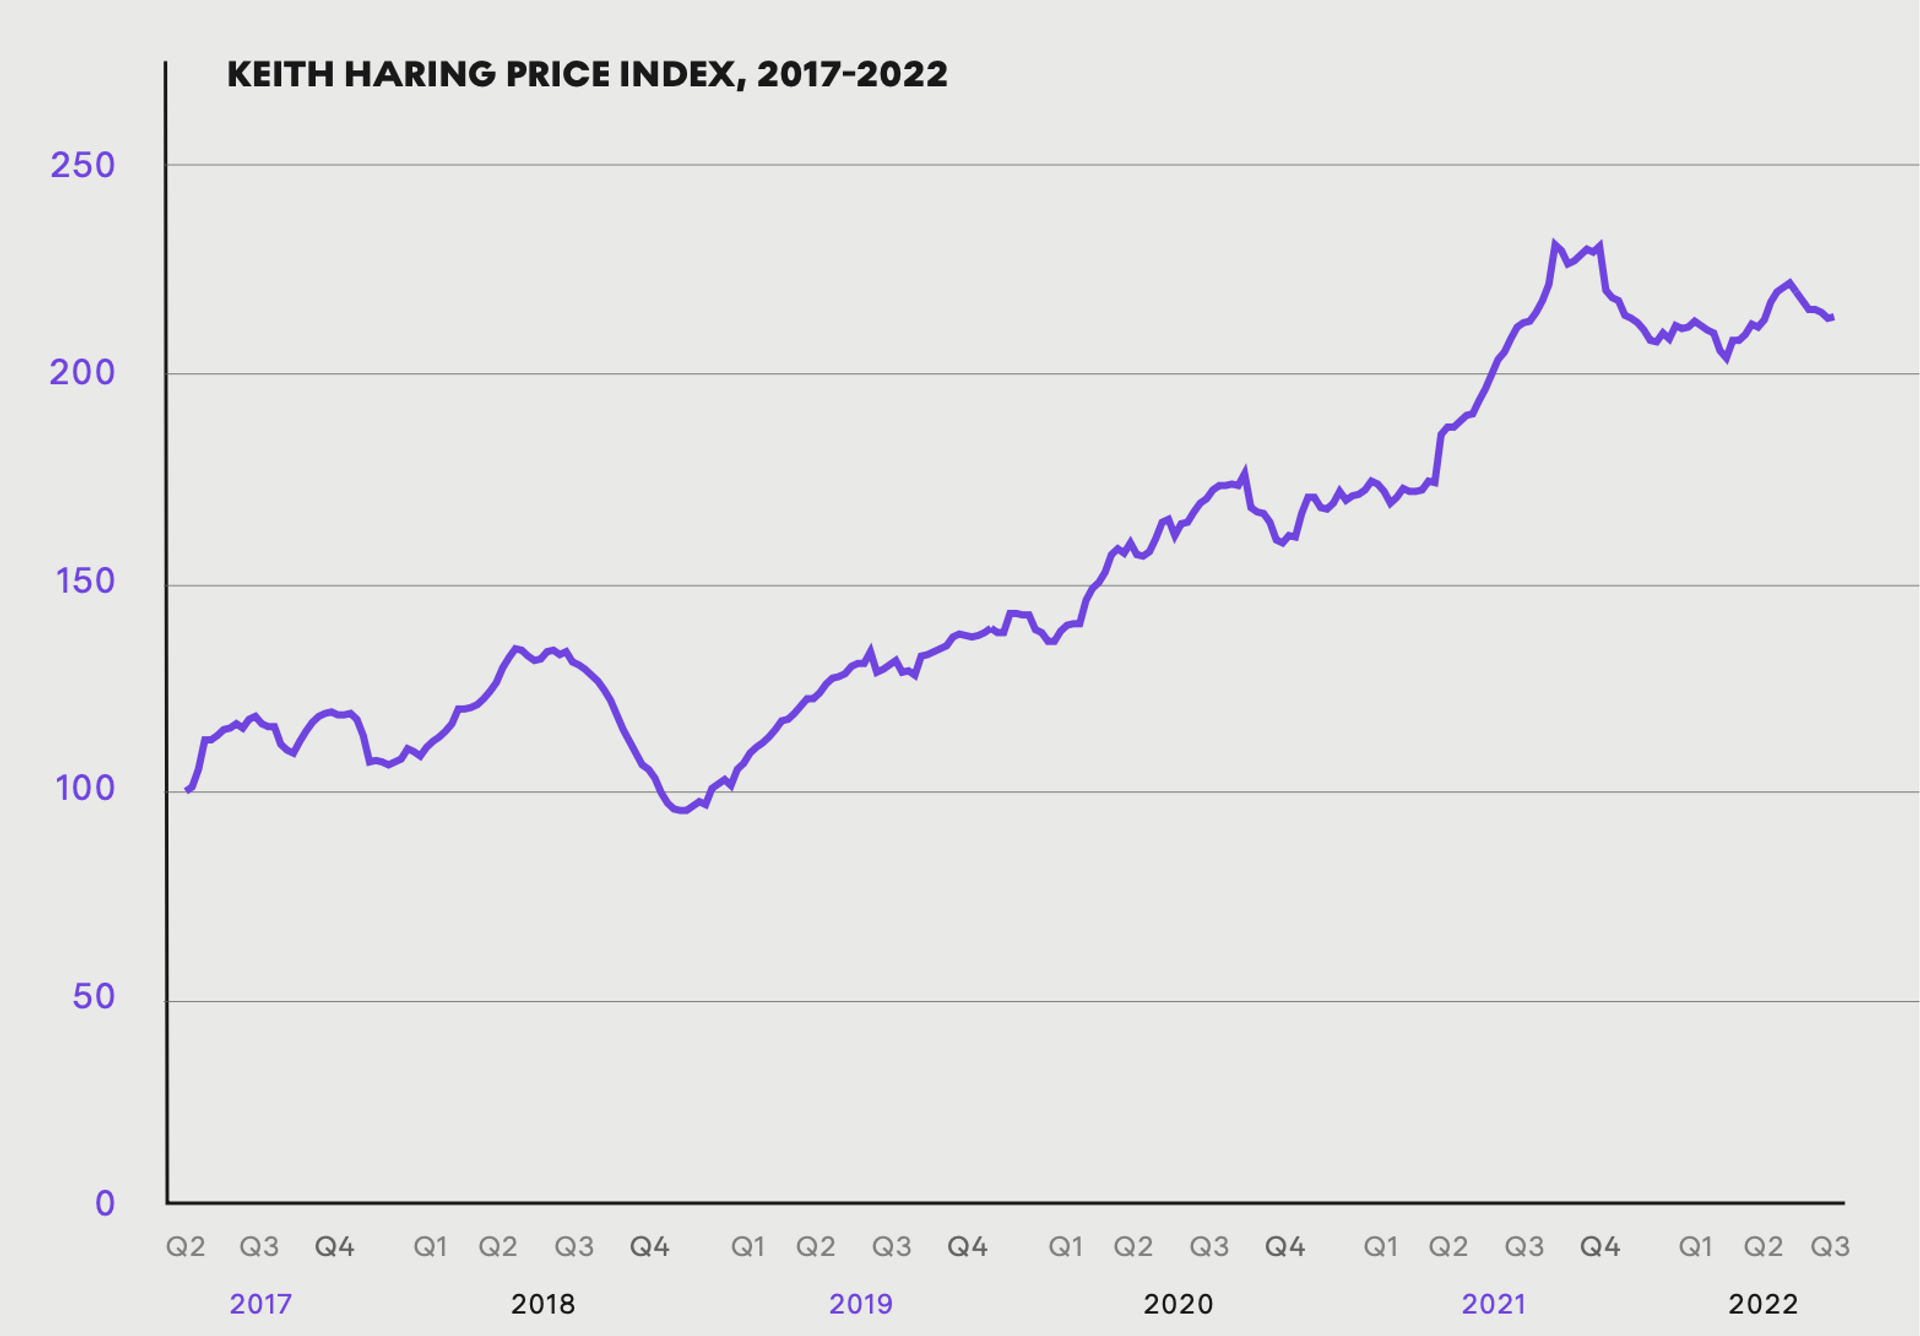 Keith Haring Price Index, 2017-2022